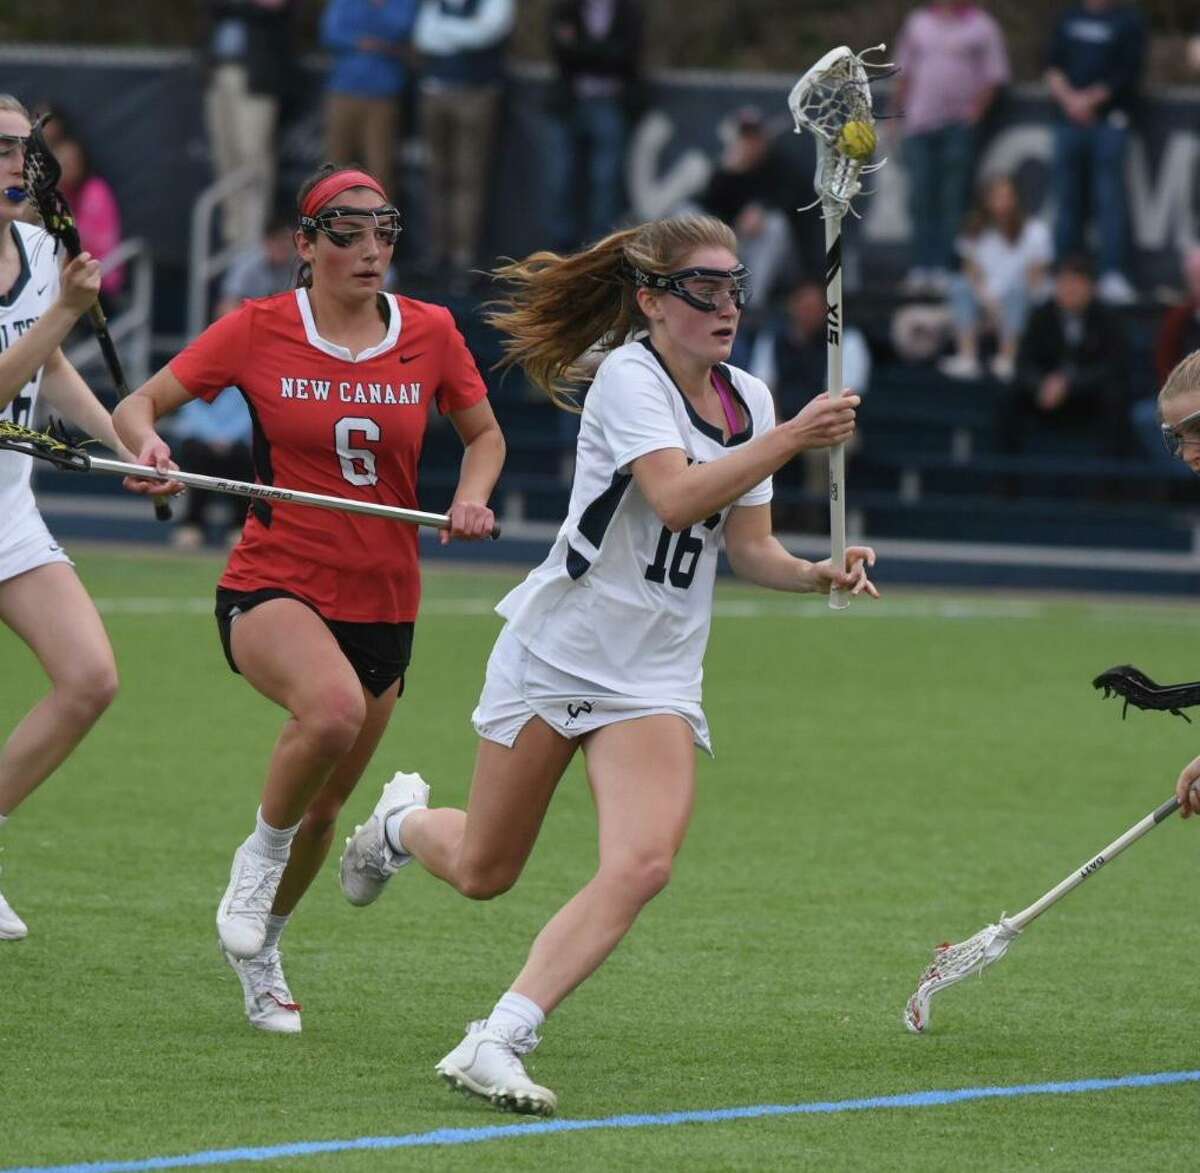 Wilton’s Addison Pattillo (16) carries the ball while pursued by New Canaan’s Kaleigh Harden (6) during a girls lacrosse game on Wednesday in Wilton.